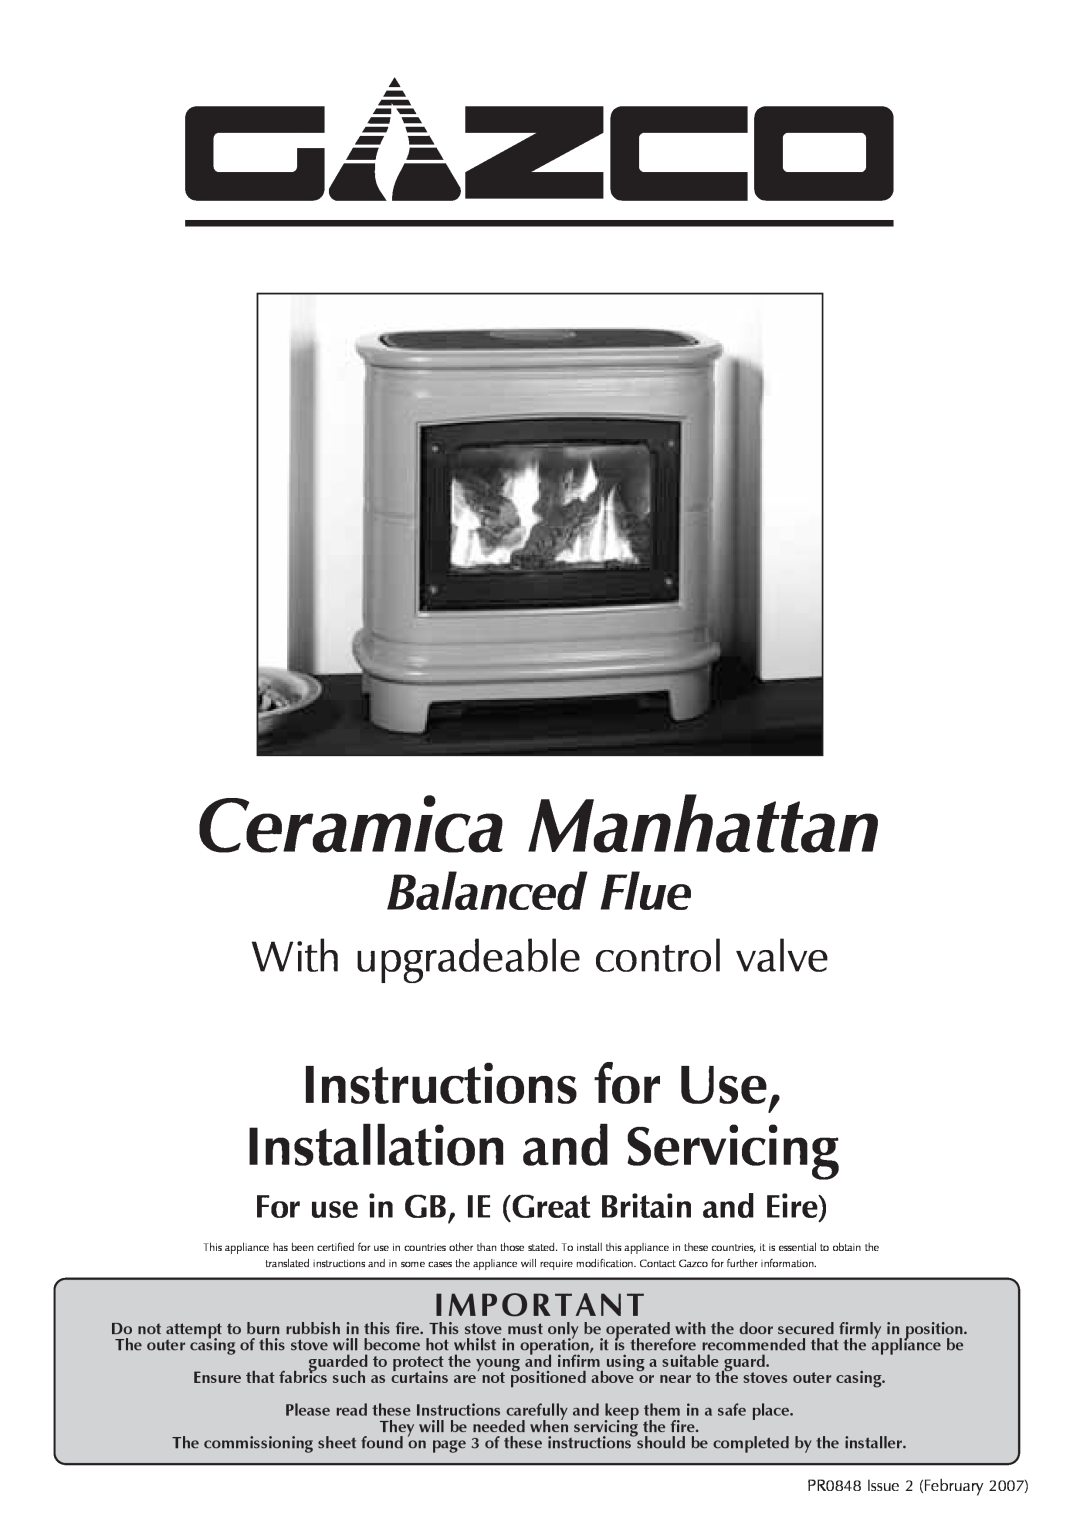 Stovax Ceramica Manhattan Wood Stove manual Instructions for Use Installation and Servicing, Balanced Flue 